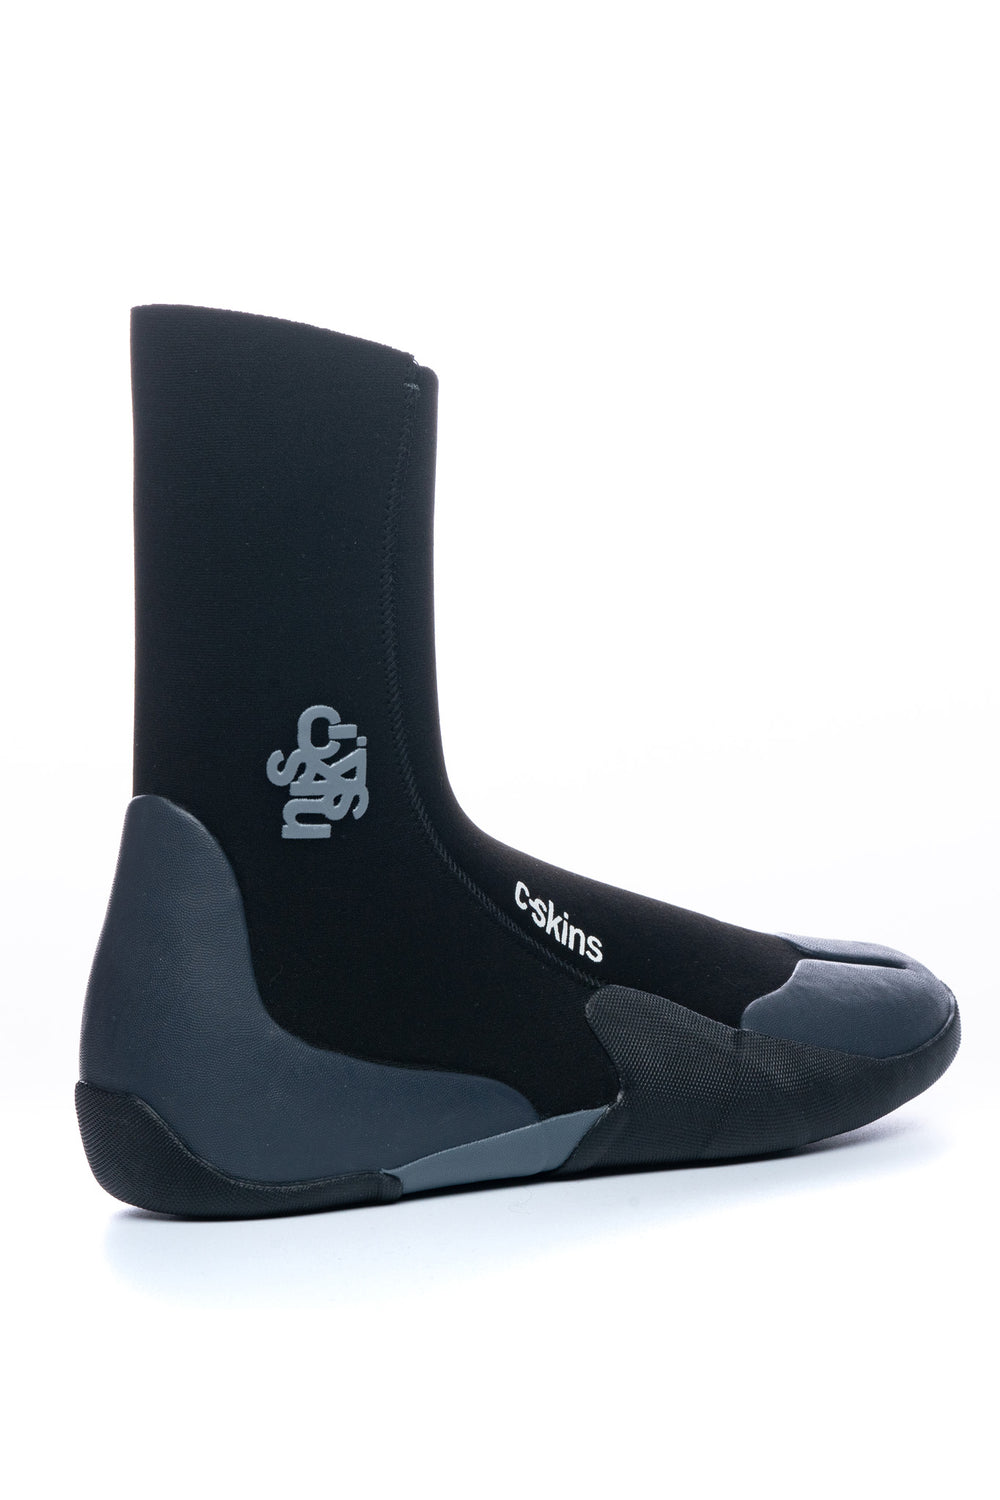 C-Skins Legend Adult 5mm Round Toe Wetsuit Boot